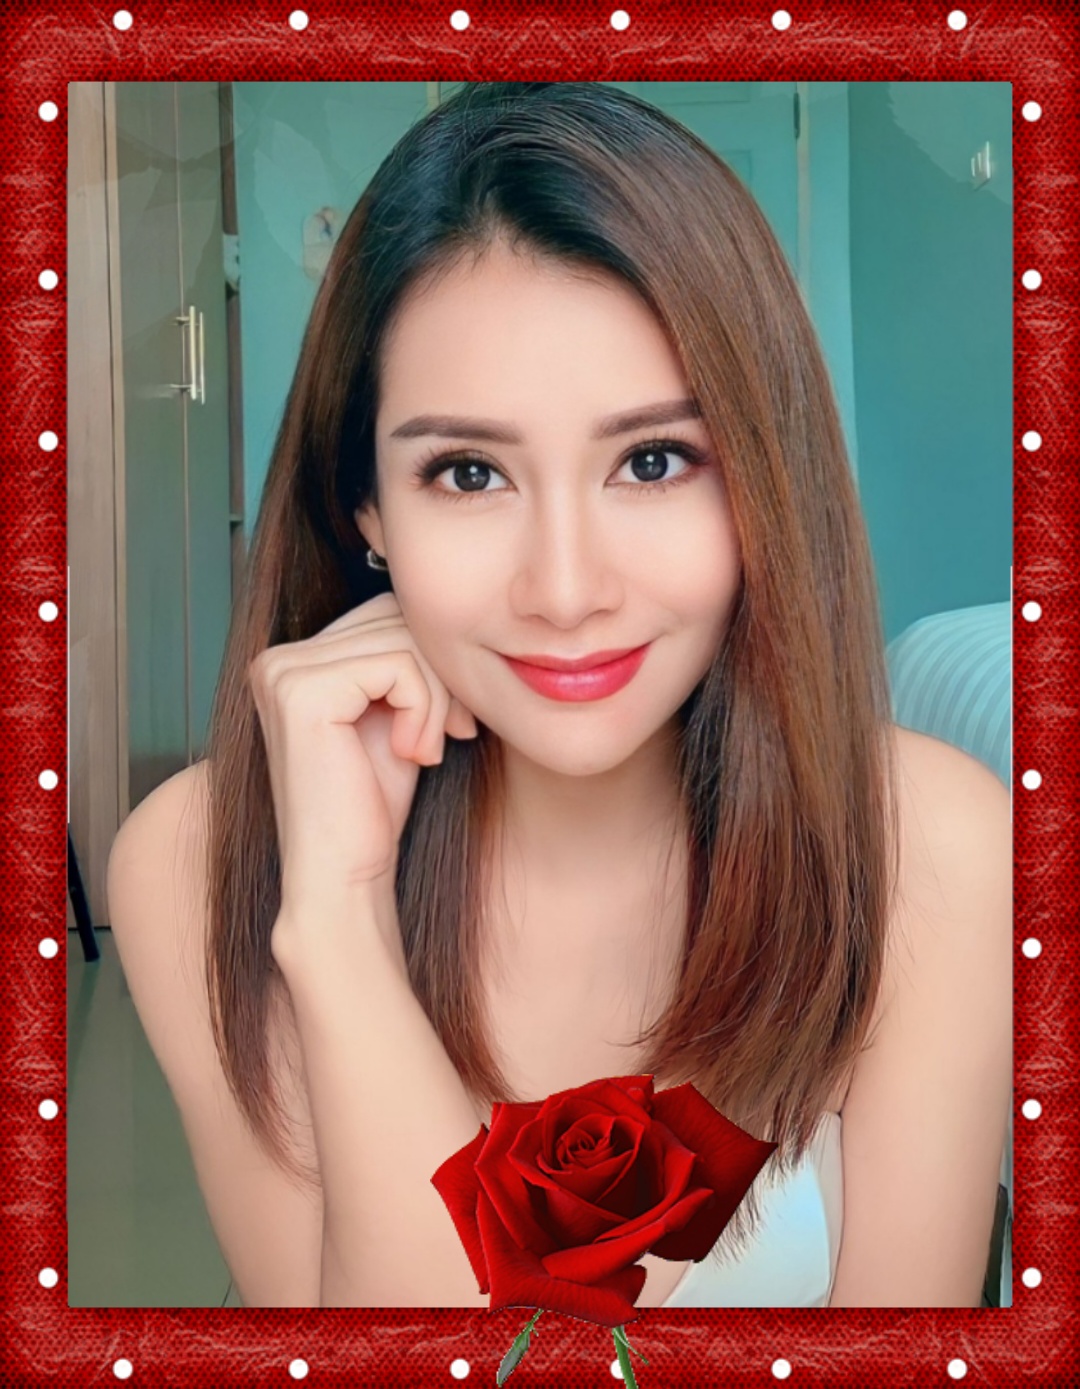 Lifestyle Outcall Massage Service in Bangkok